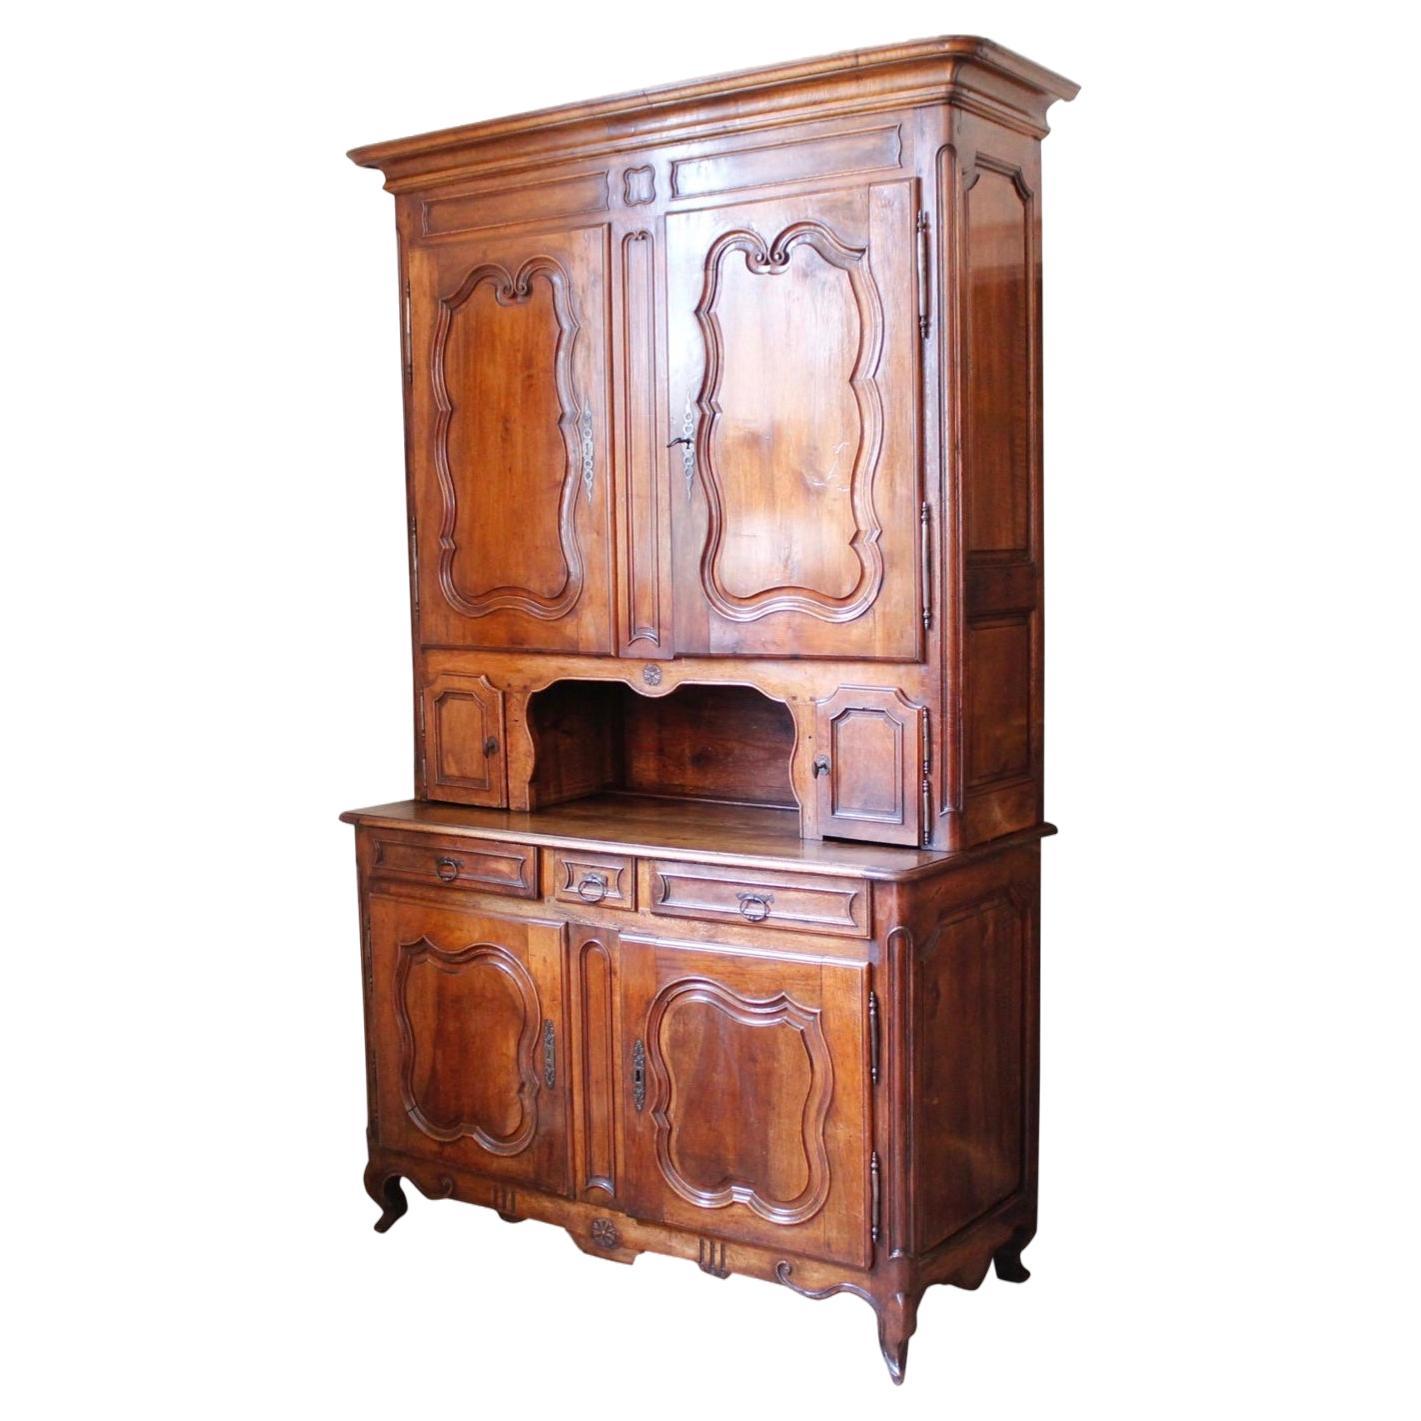 French Provincial Walnut Buffet À Deux Corps, Early 19th Century